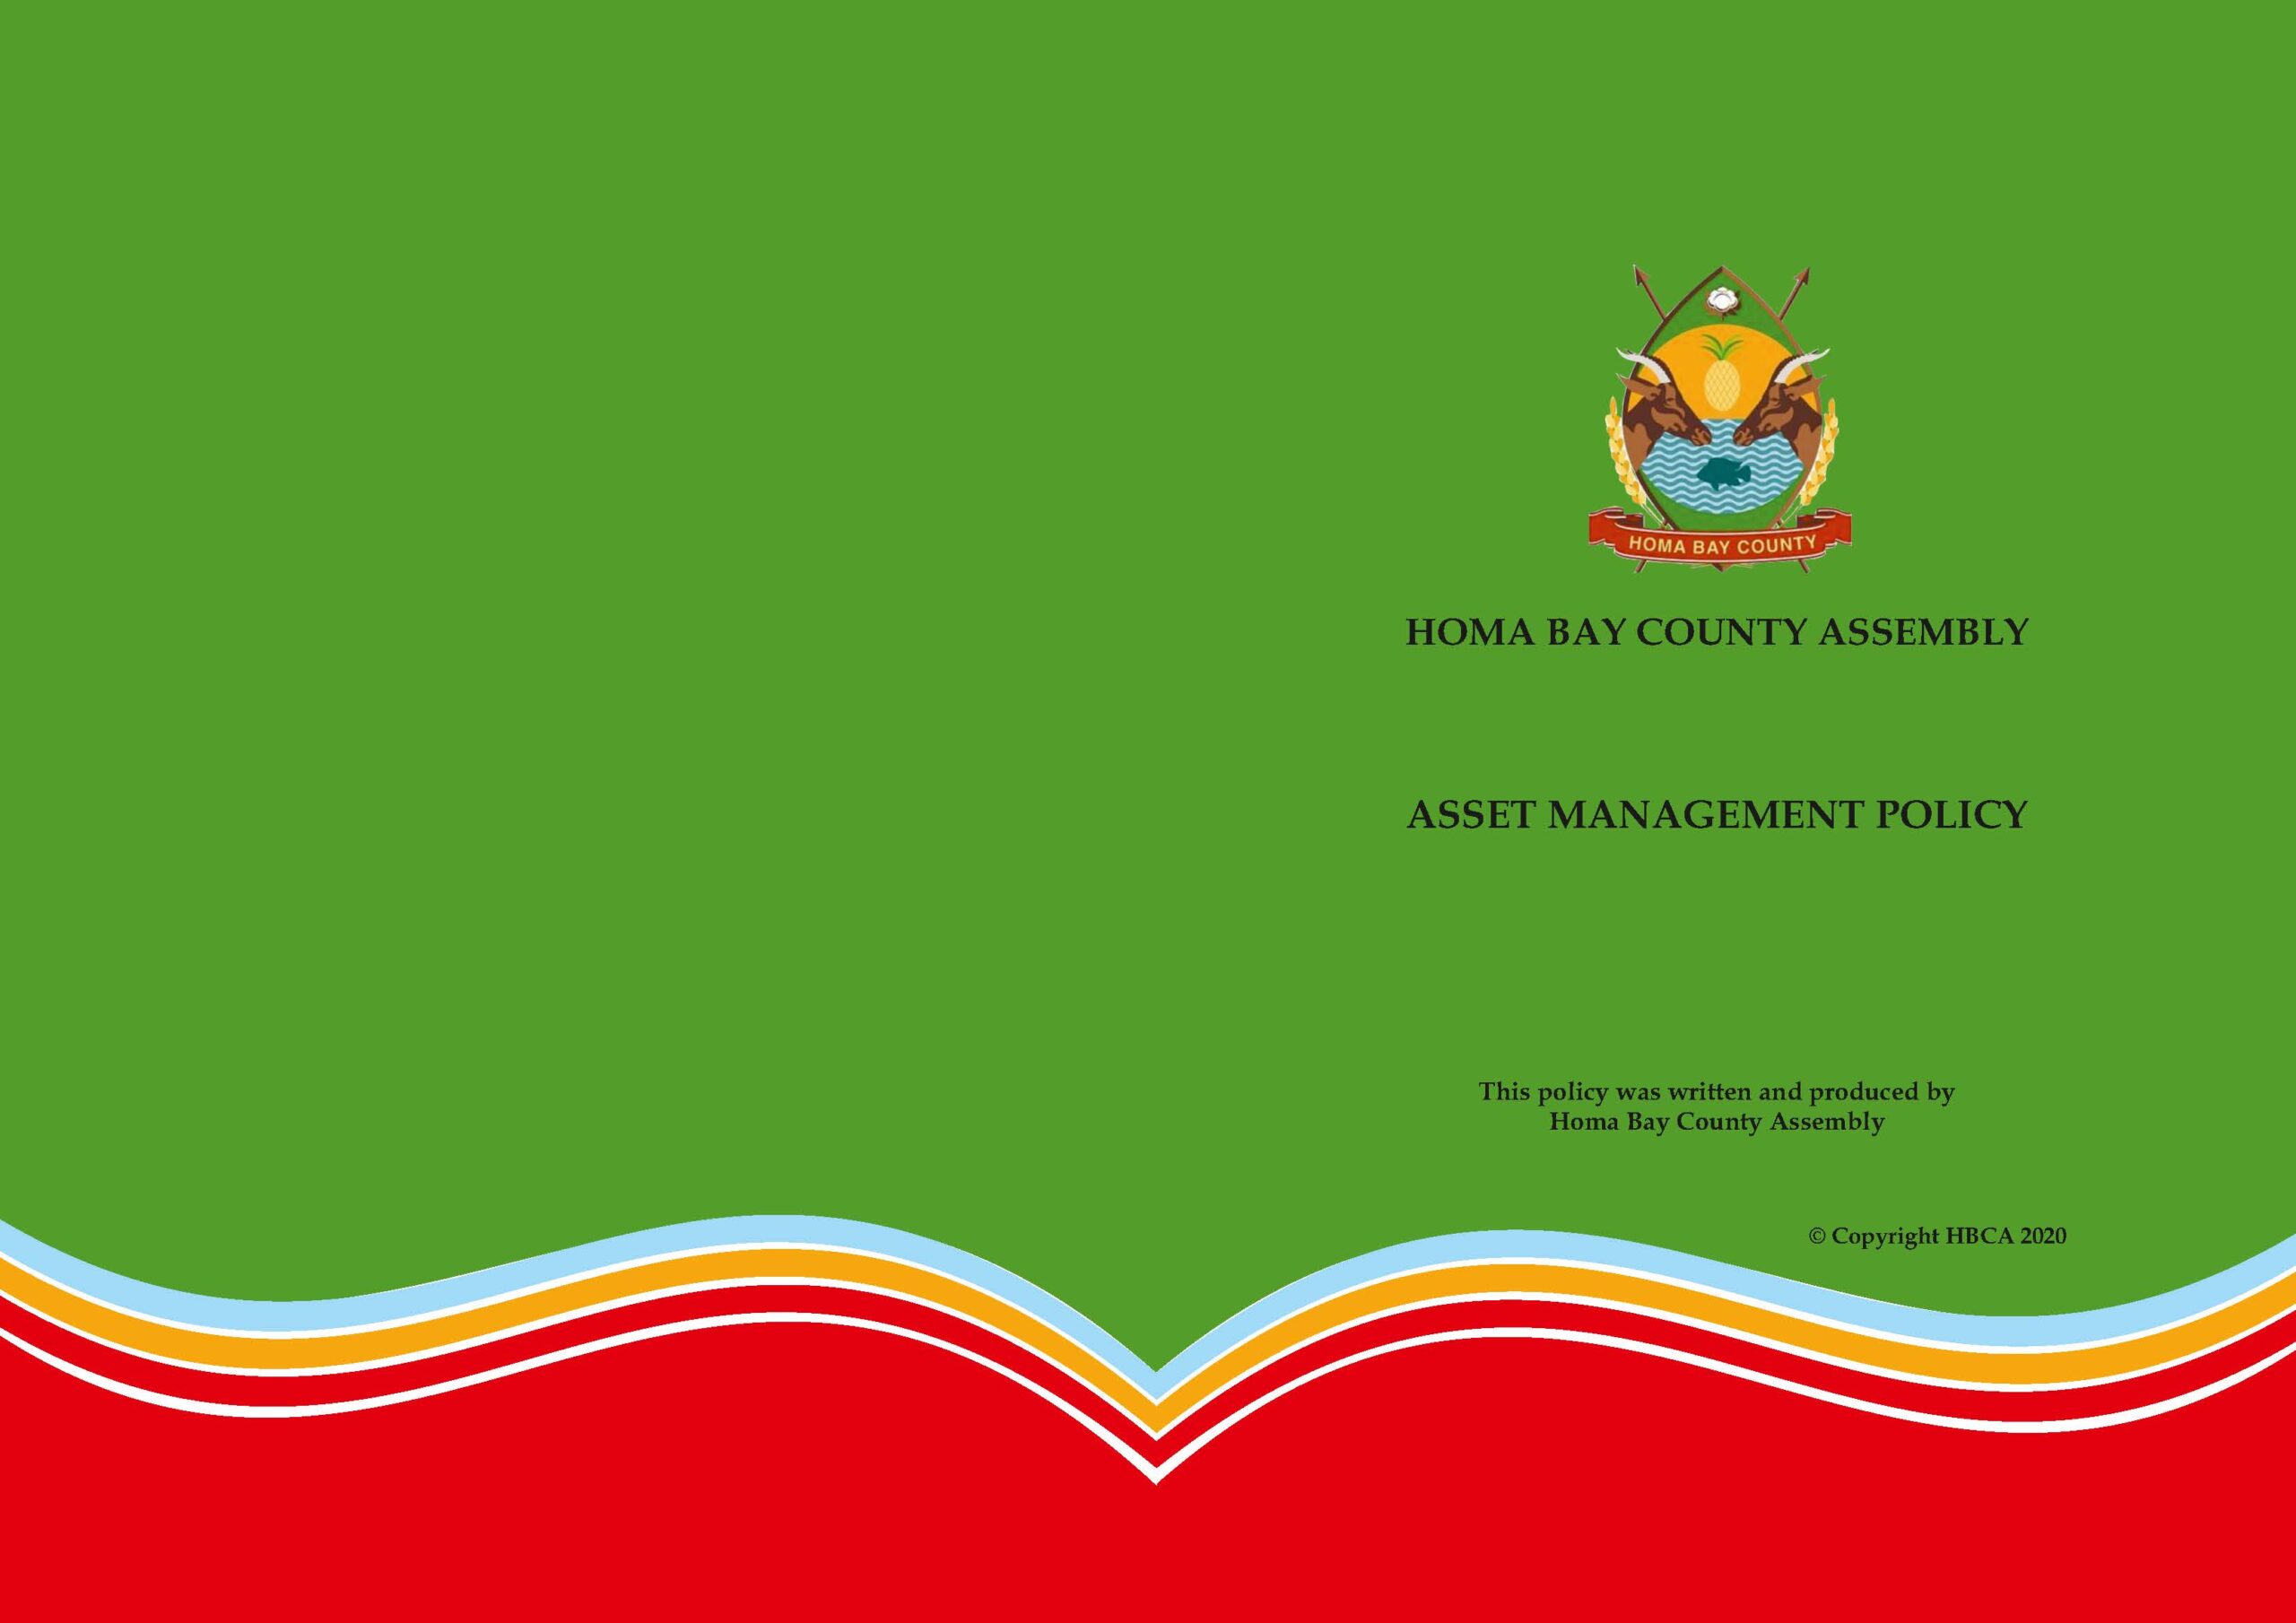 HOMA BAY COUNTY ASSEMBLY: ASSET MANAGEMENT POLICY